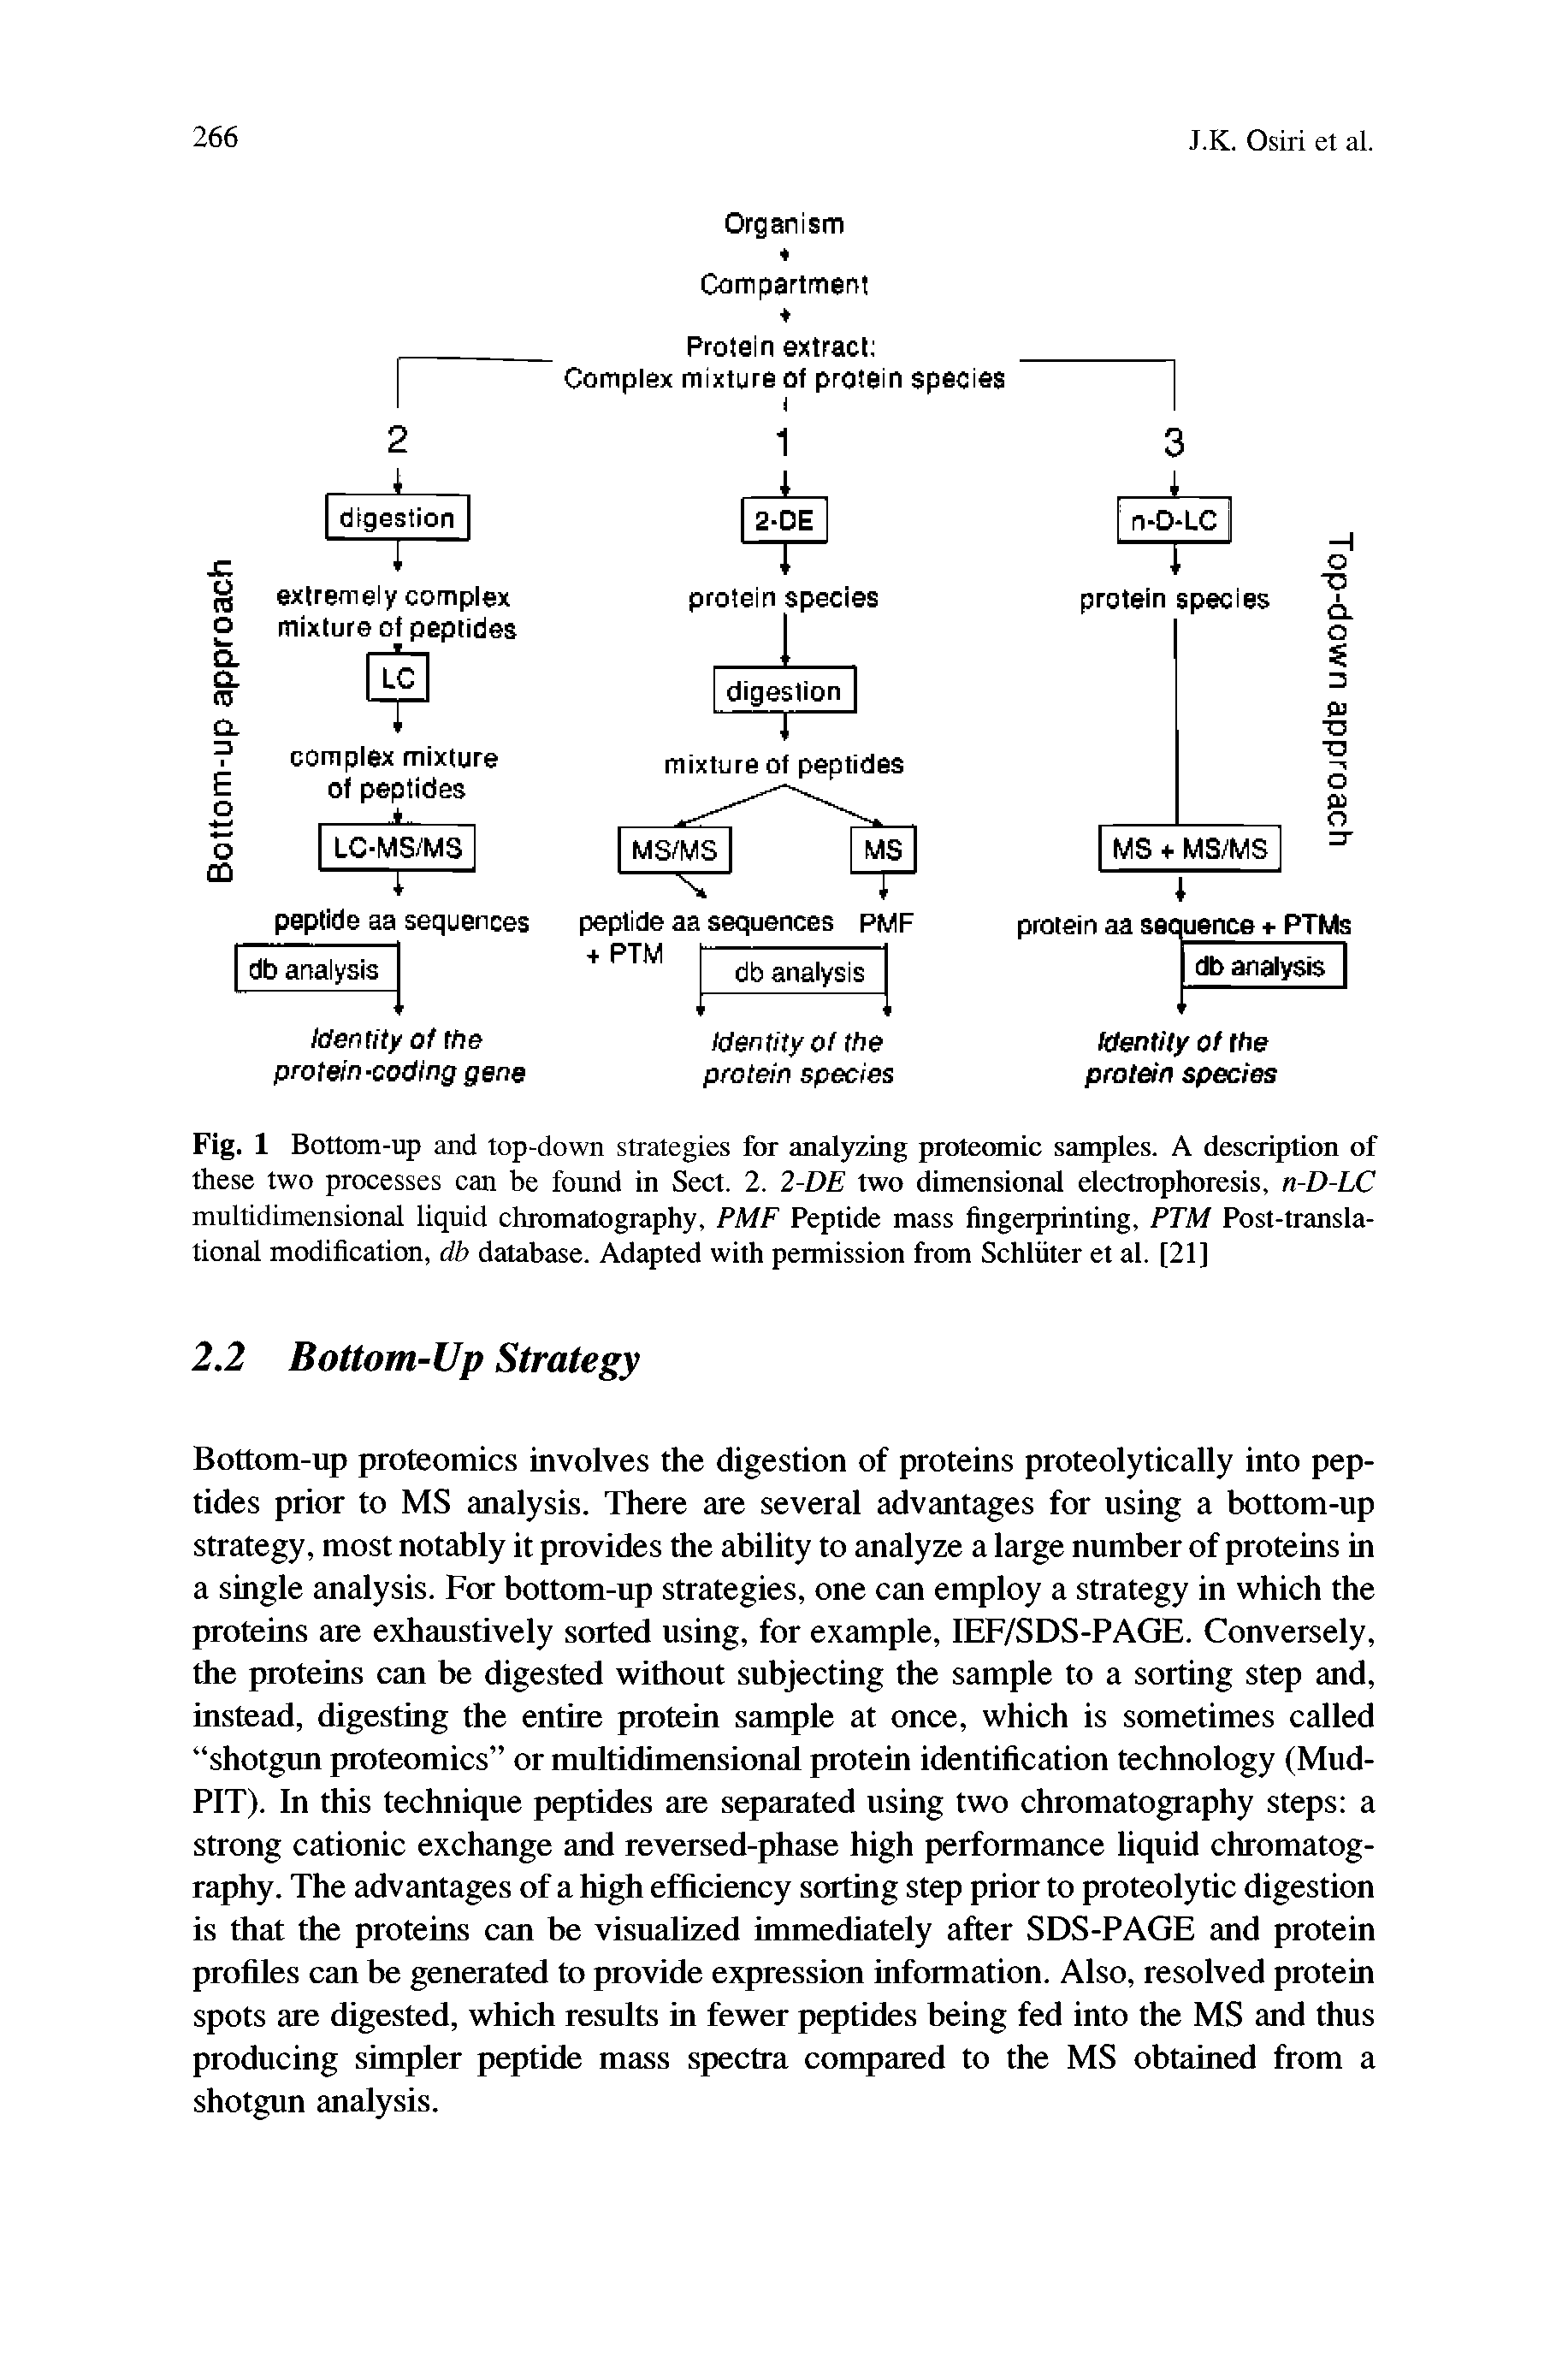 Fig. 1 Bottom-up and top-down strategies for analyzing proteomic samples. A description of these two processes can be found in Sect. 2. 2-DE two dimensional electrophoresis, n-D-LC multidimensional liquid chromatography, PMF Peptide mass fingerprinting, PTM Post-transla-tional modification, db database. Adapted with permission from Schliiter et al. [21]...